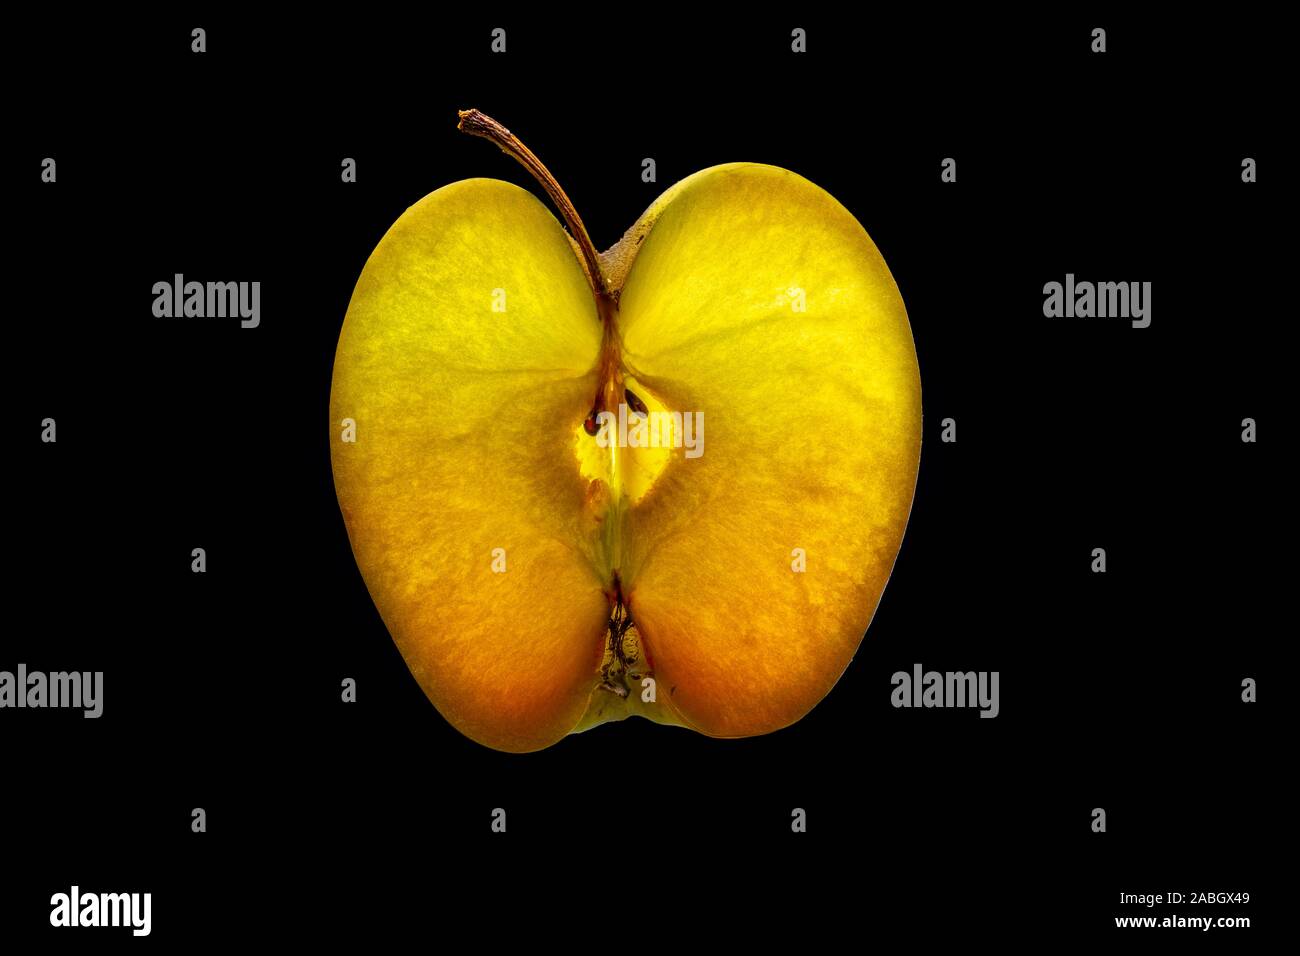 Slice of Apple with Backlight Isolated on Black Background Stock Photo